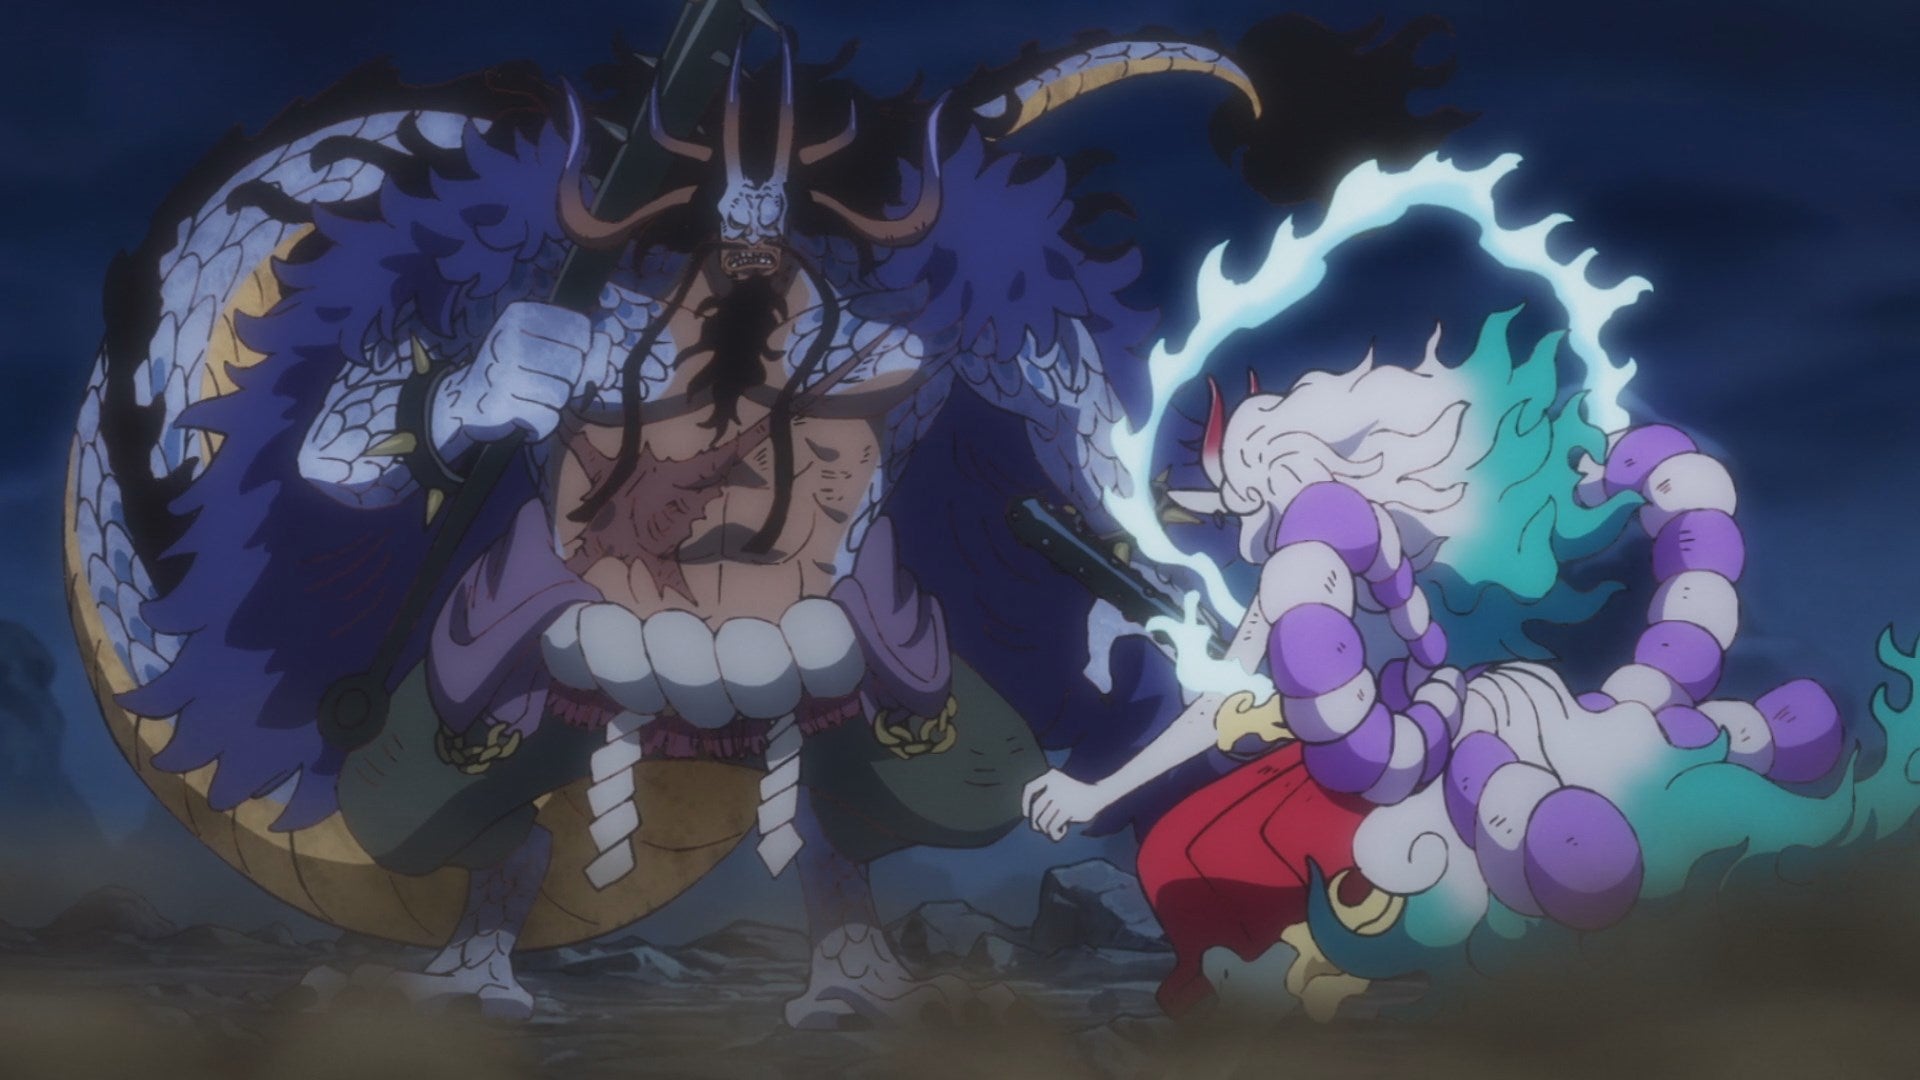 Yamato turns his bonds of passion to strength to sever ties with Kaido! # OnePiece, episode 1048, premieres tonight on Crunchyroll!